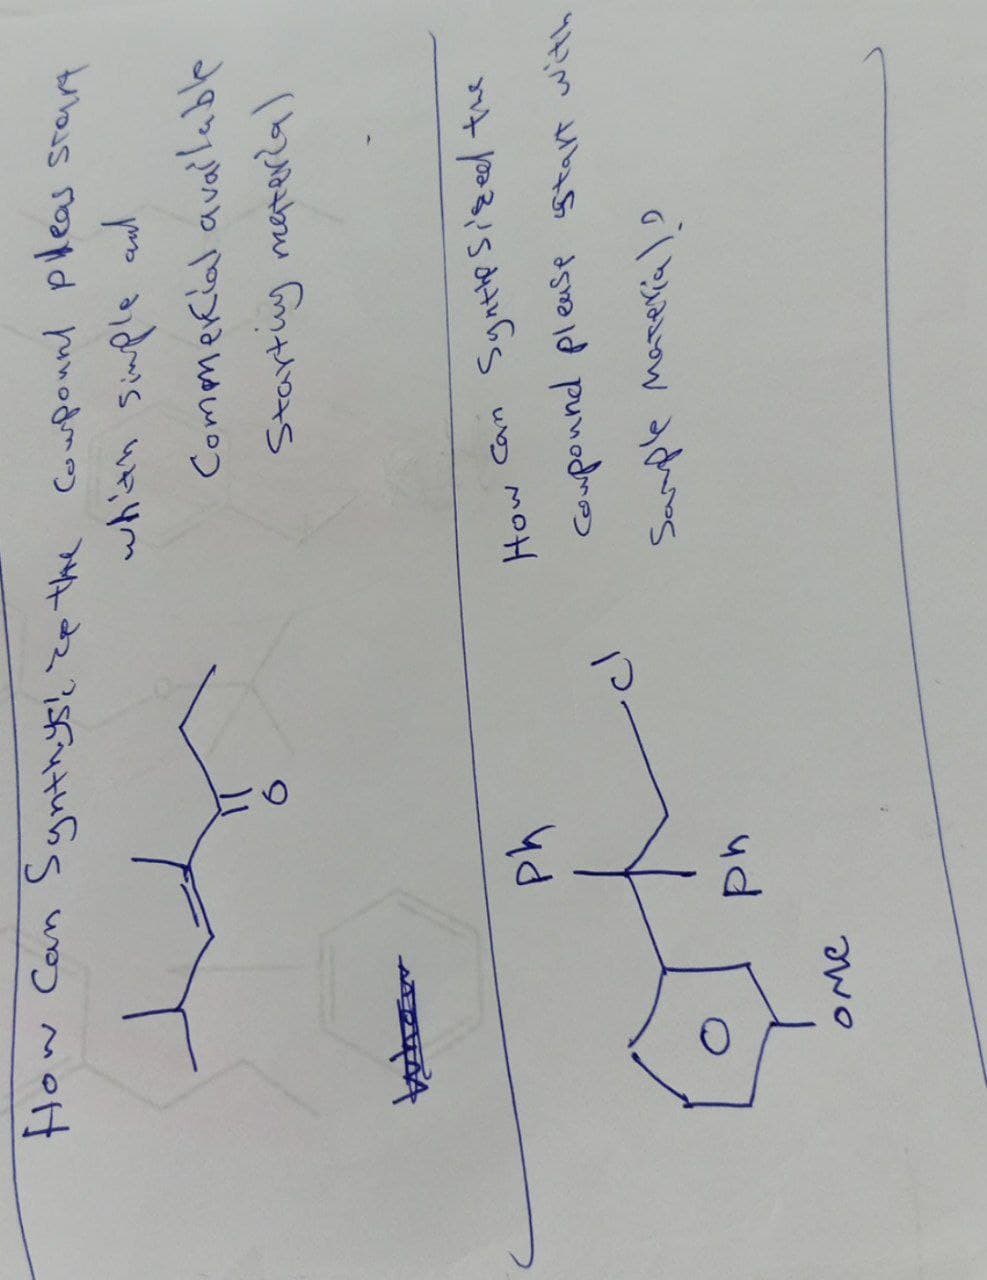 How Can Synthys be the compound pleas start
whith simple and
оме
Ph
Ph
cl
Commercial available
Startiy materia)
How Can Synthesized the
Compound please start with
Sample Material?